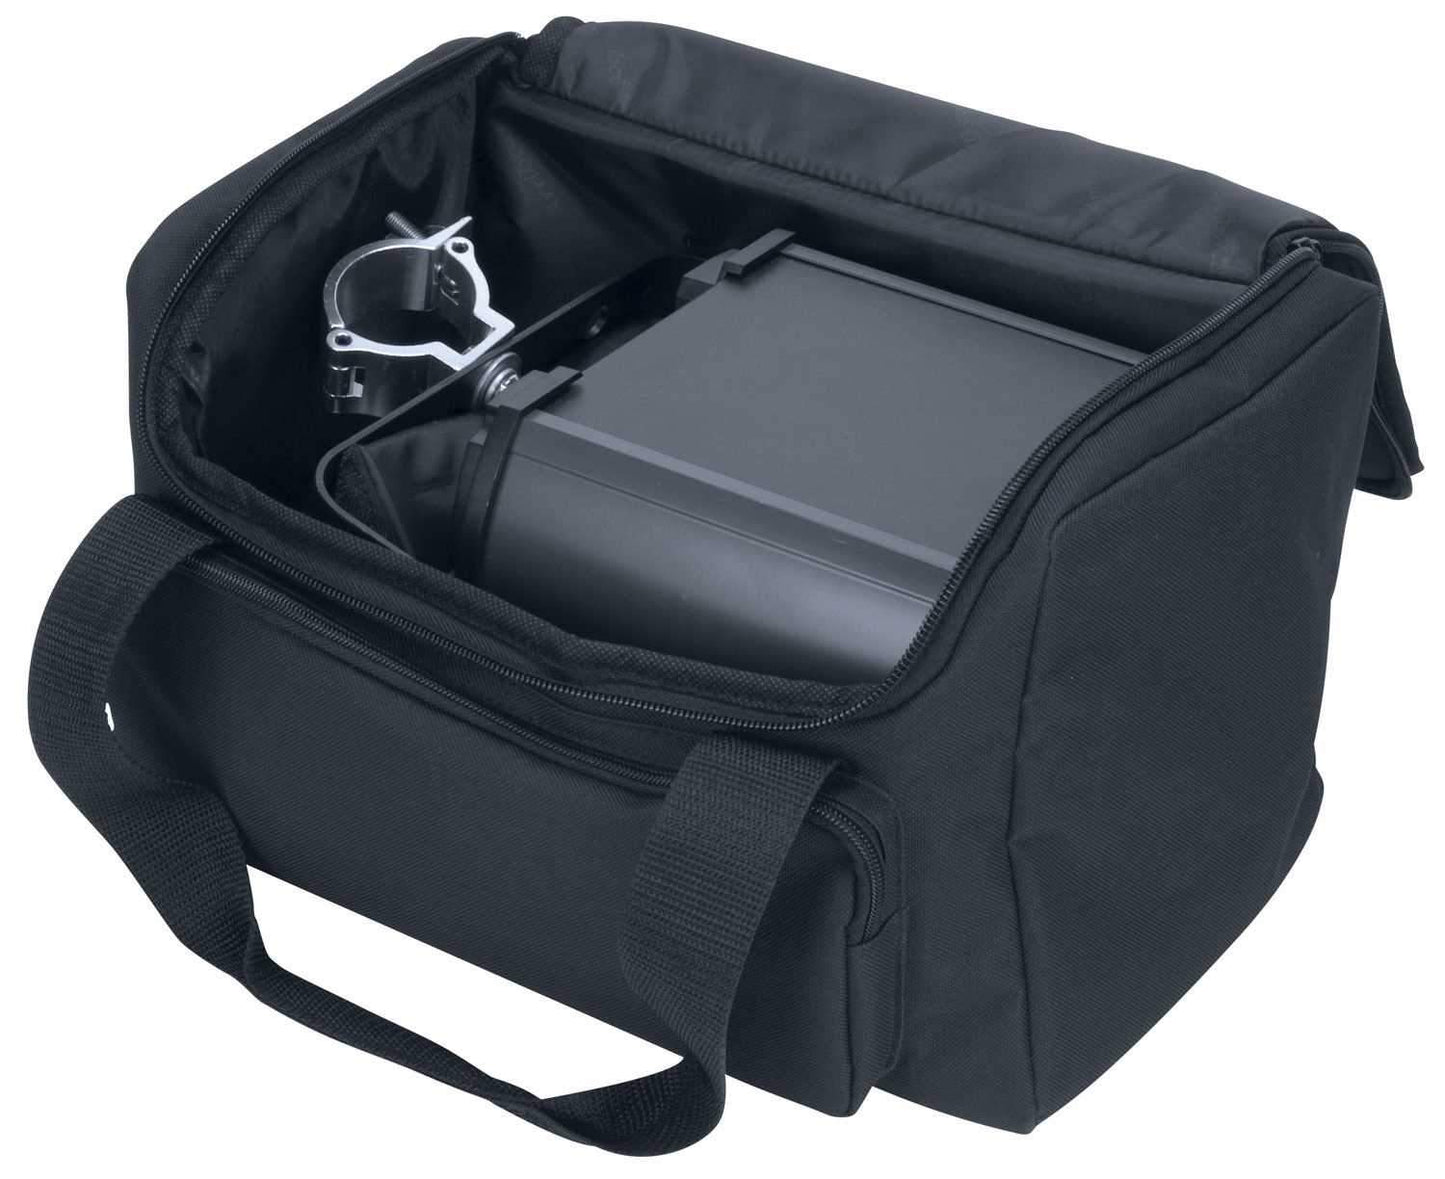 Arriba AC126 Bag for Large Lasers & Effect Lights - ProSound and Stage Lighting